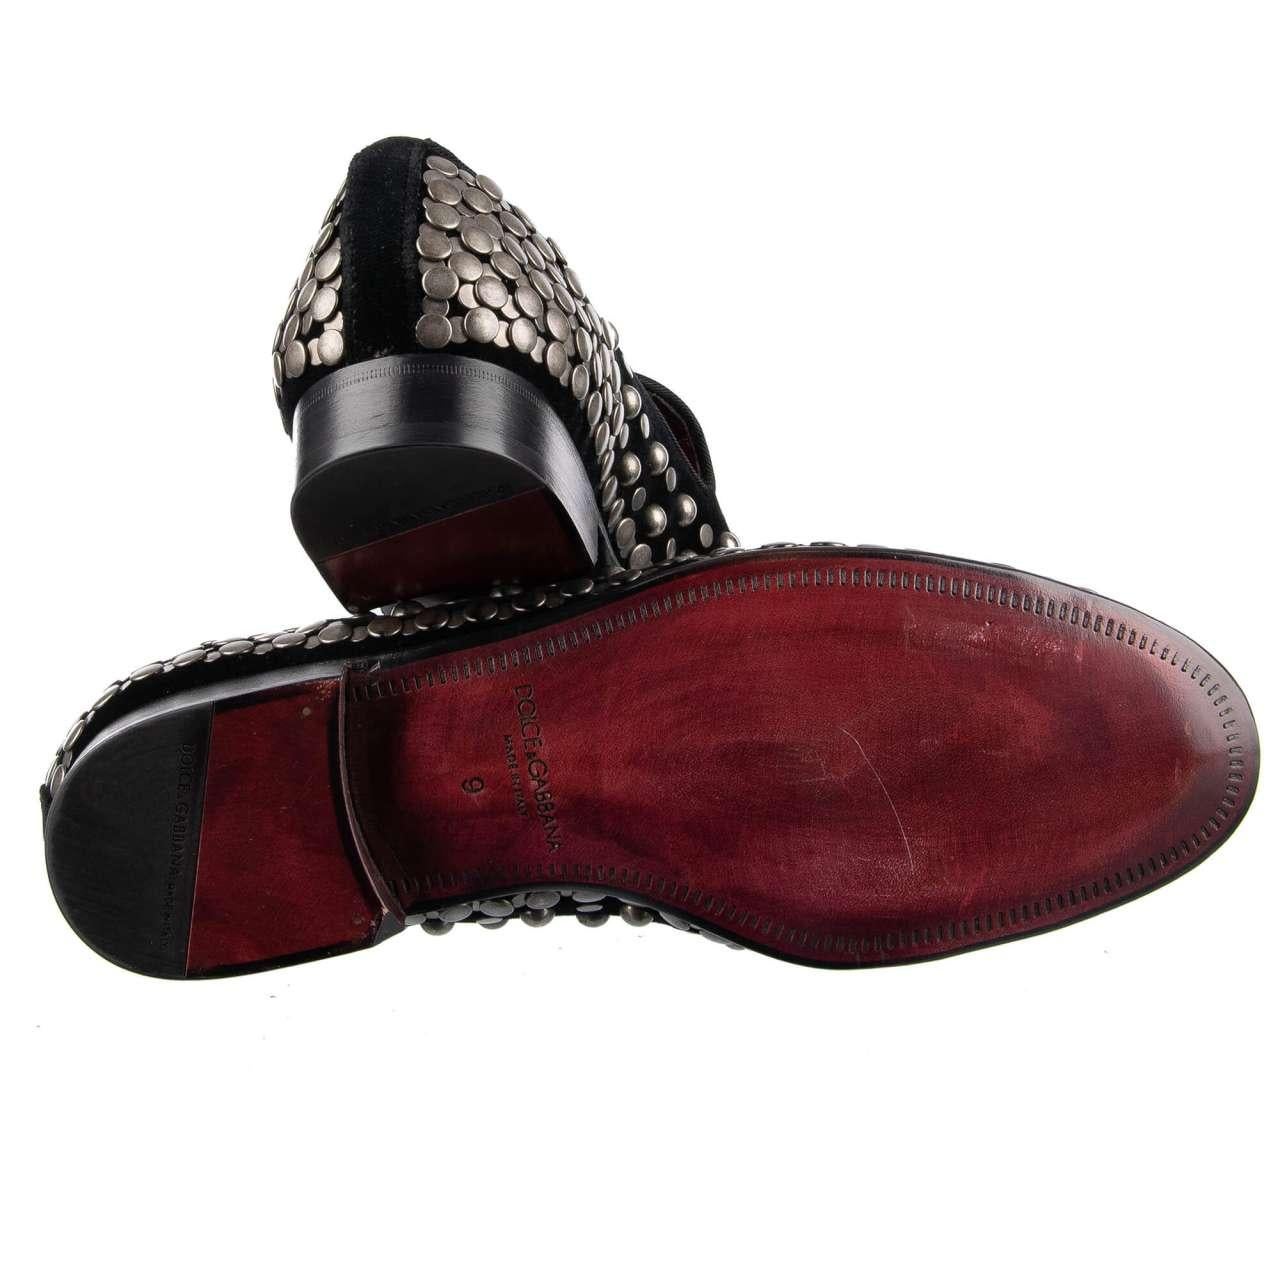 - Velvet Loafer MILANO with massive studs applications by DOLCE & GABBANA - RUNWAY - Dolce & Gabbana Fashion Show - MADE IN ITALY - New with Box - Former RRP: EUR 1.350 - Model: CA5499-AL508-80652 - Material: 100% Cotton - Sole: Leather - Color: